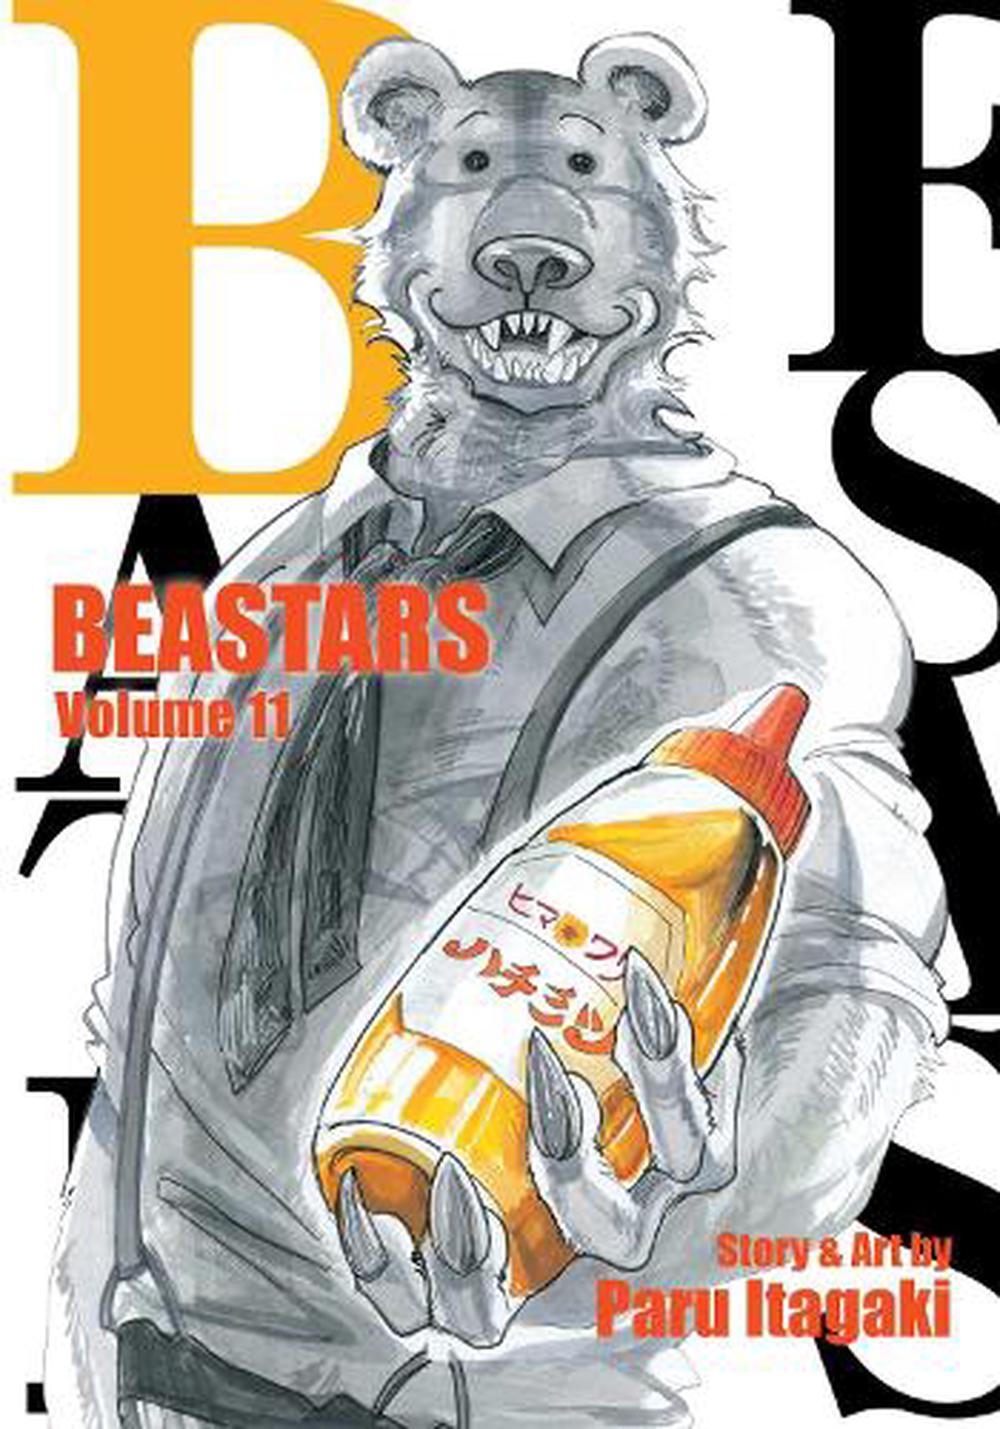 Beastars Vol 11 By Paru Itagaki Paperback Buy Online At The Nile